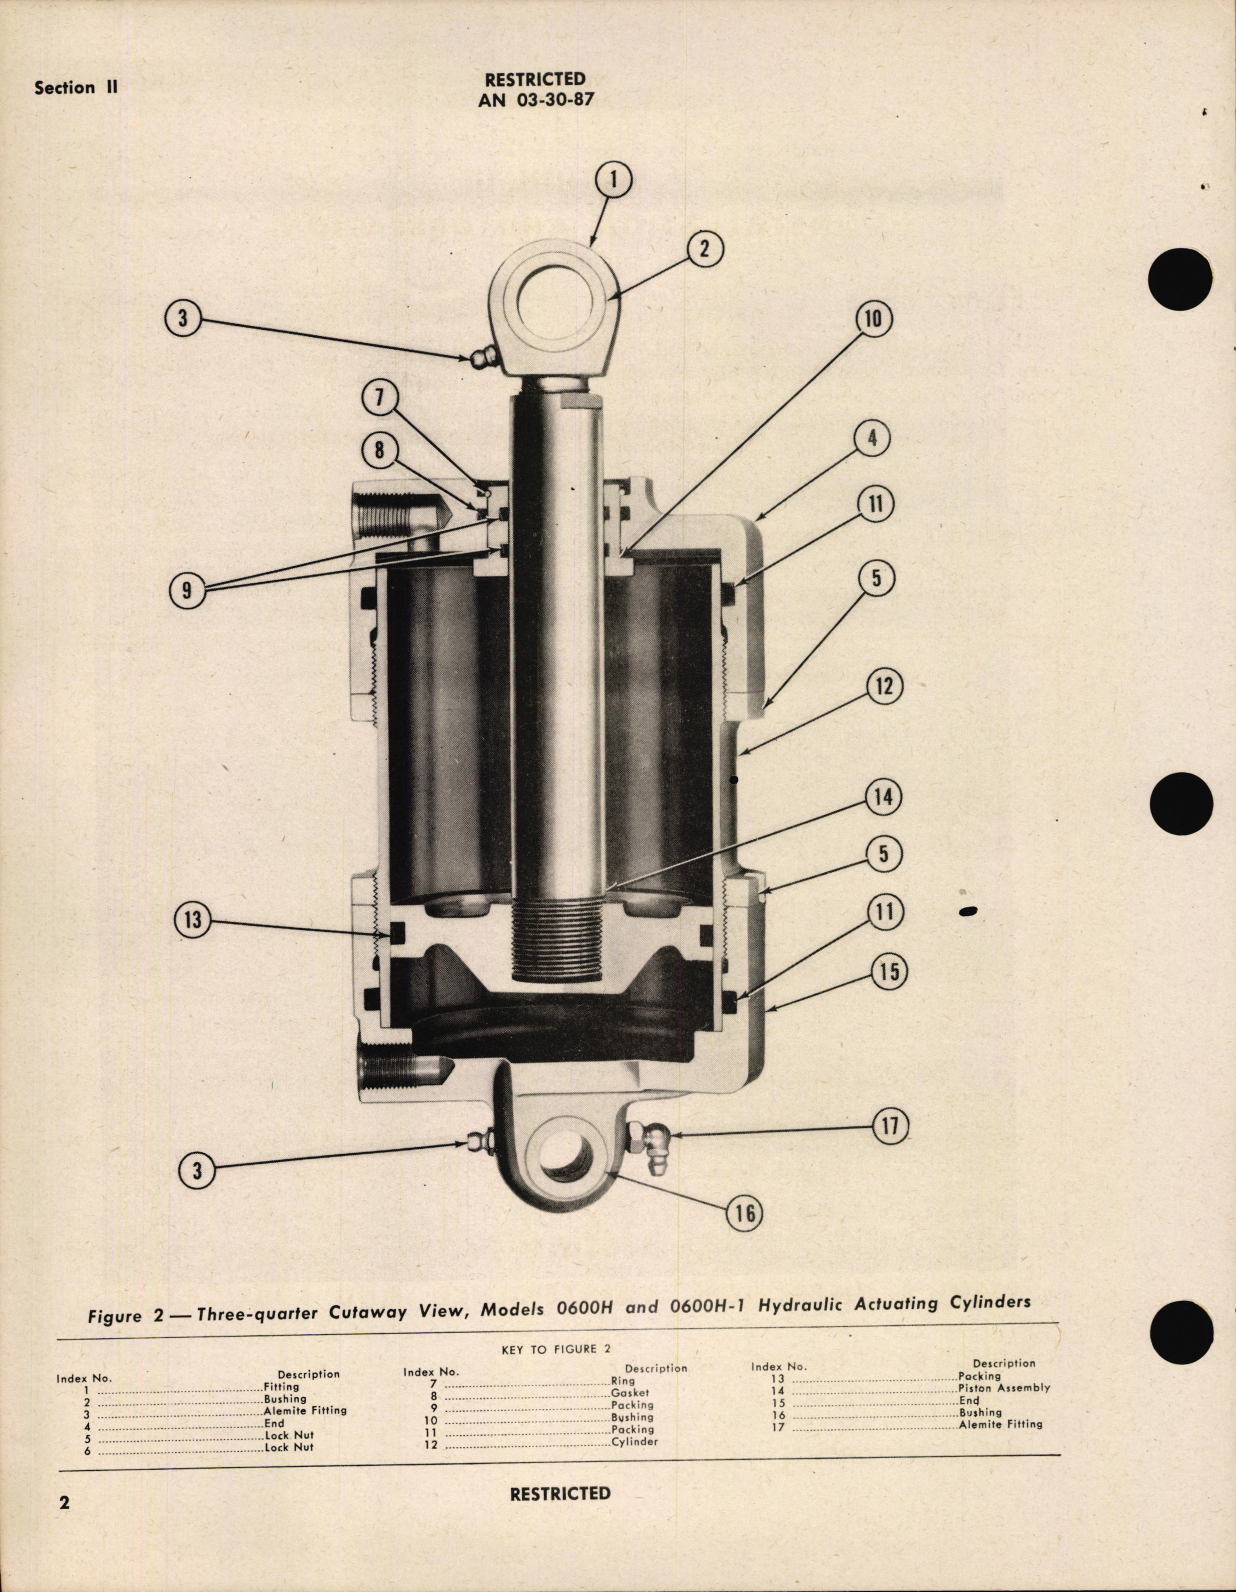 Sample page 6 from AirCorps Library document: Handbook of Instructions with Parts Catalog for Models 0600H and 0600H-1 Hydraulic Actuating Cylinders